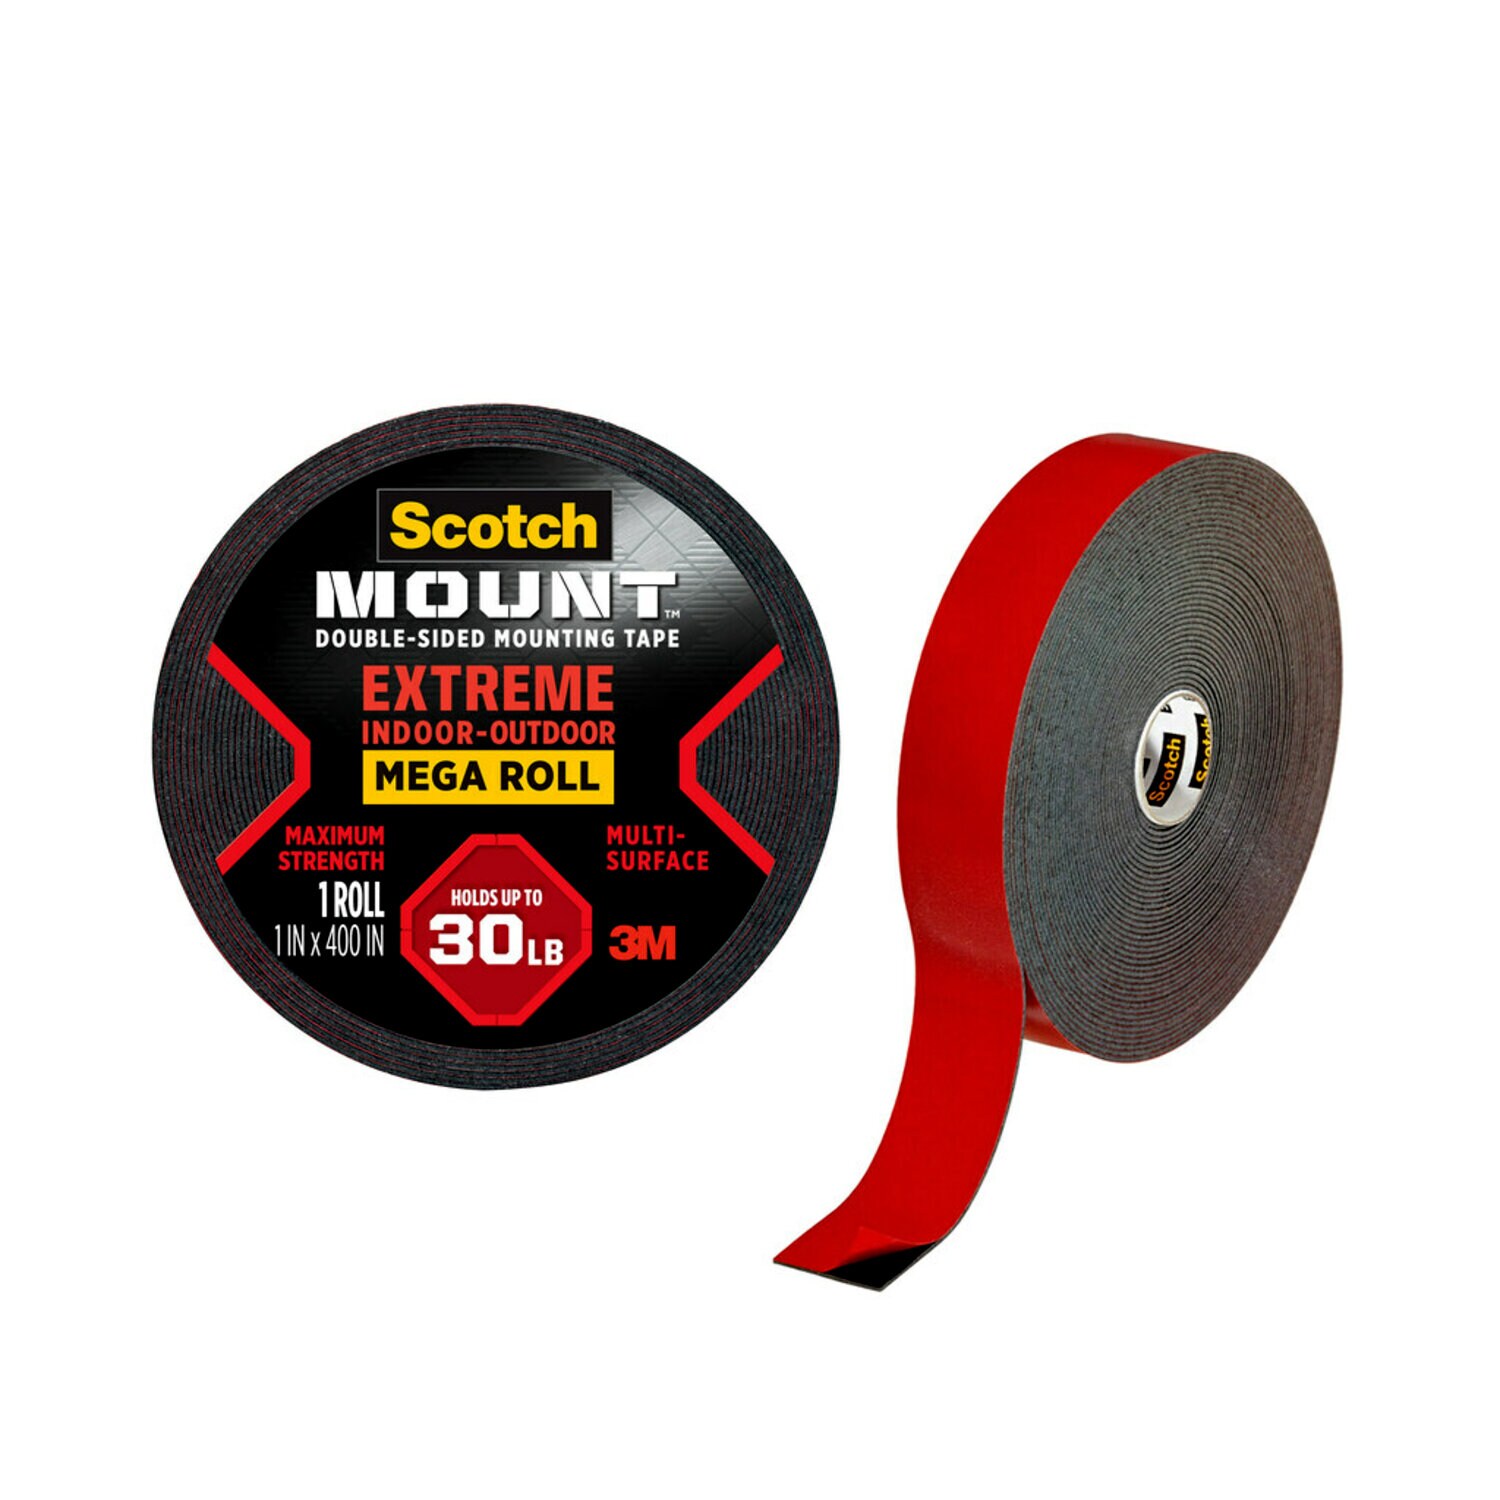 7100205645 - Scotch-Mount Extreme Double-Sided Mounting Tape Mega Roll 414H-LONG-DC, 1 In X 400 In (2,54 Cm X 10,1 M)